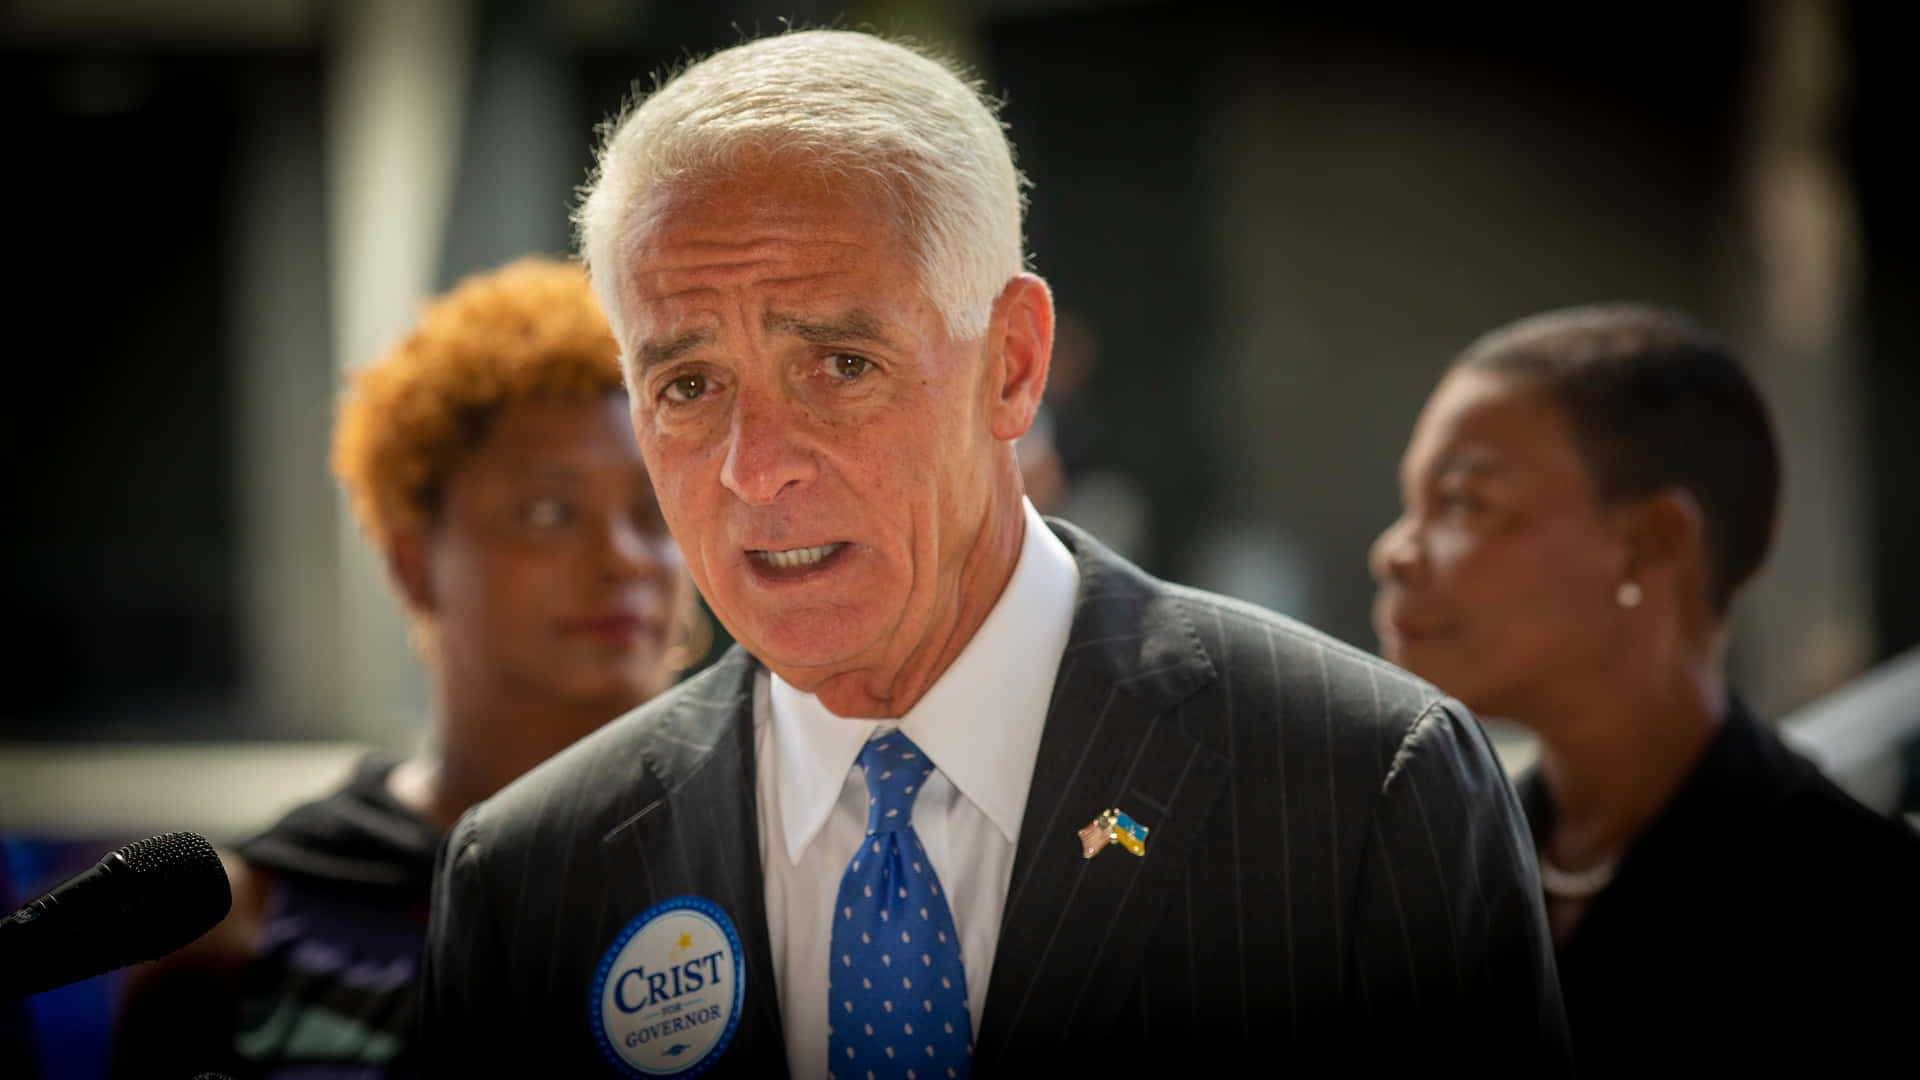 Florida's Charlie Crist delivering a passionate speech Wallpaper